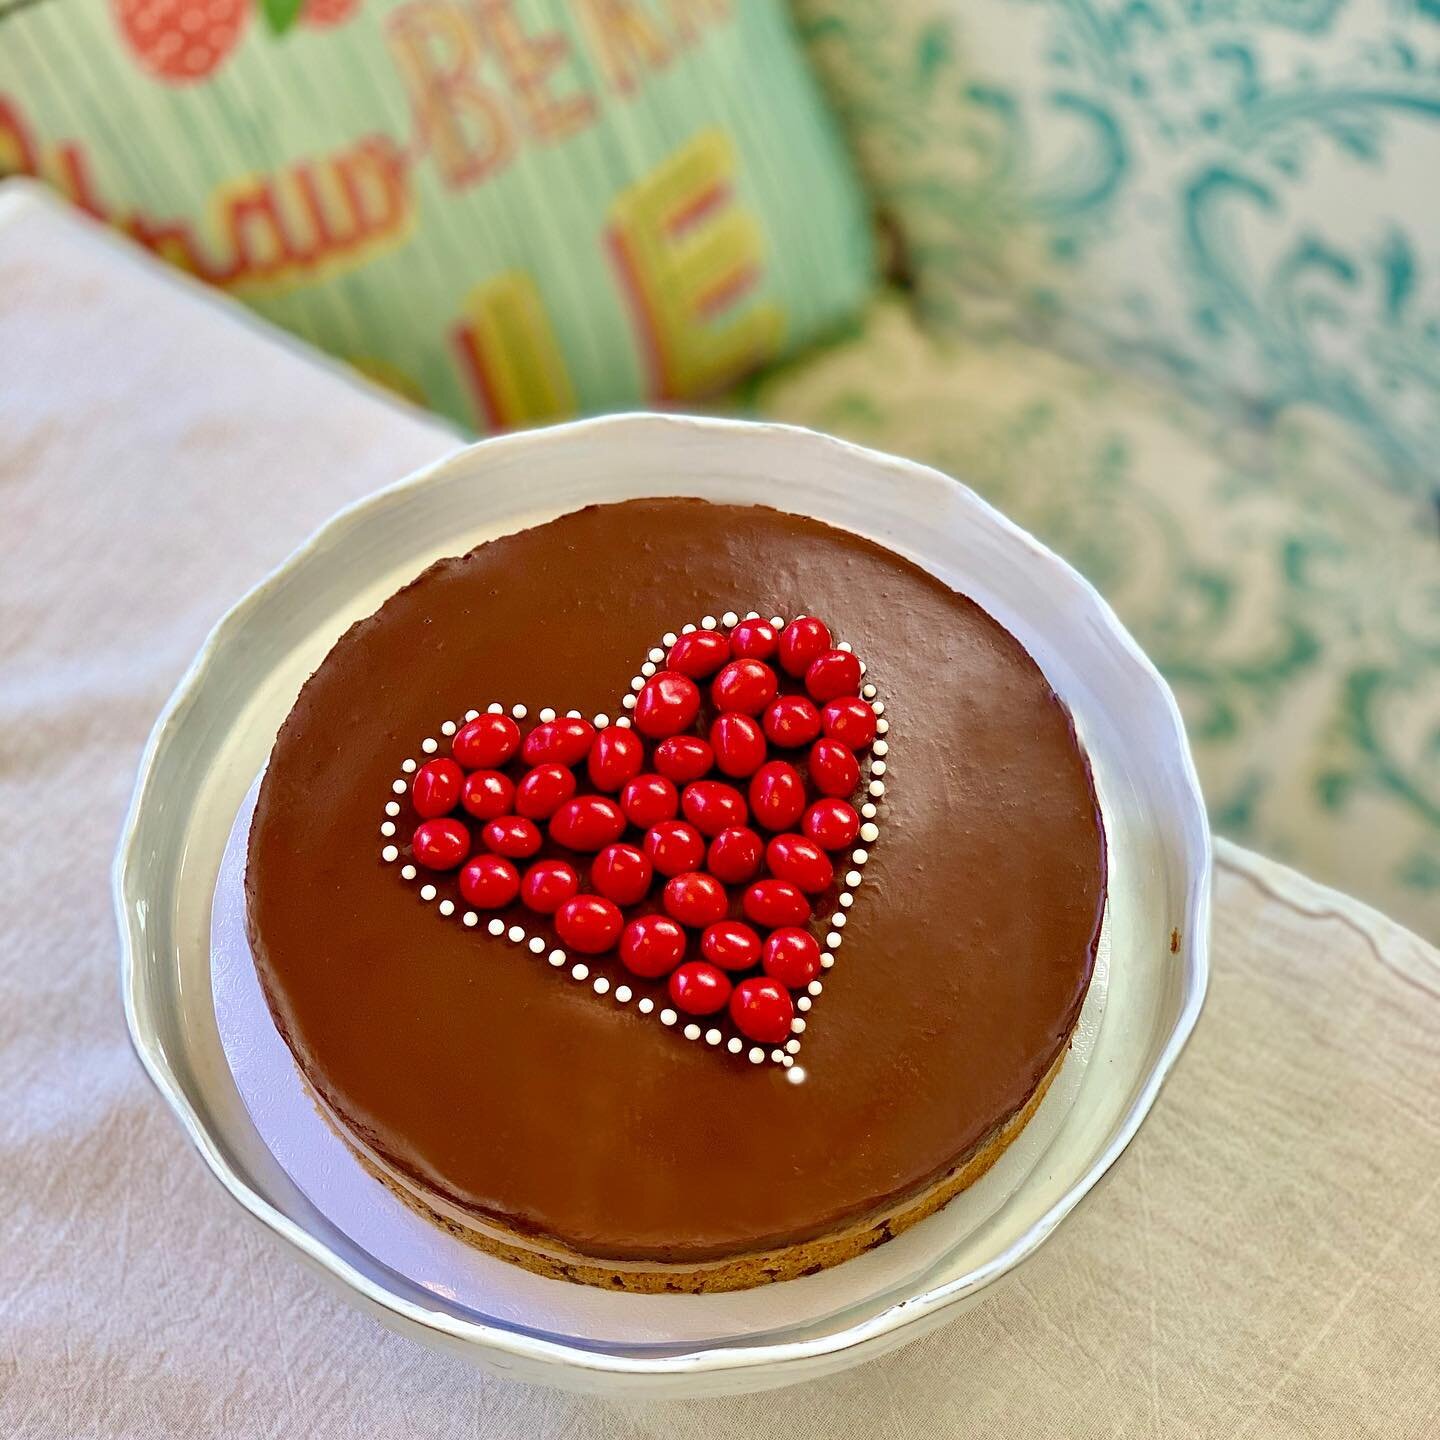 Valentine&rsquo;s Day Chocolate Chip Peanut Butter Pie. I saw this recipe in different versions at least ten times this week so I thought I would adapt it for Valentine&rsquo;s Day for my husband who loves all these things, except not so much pie. We